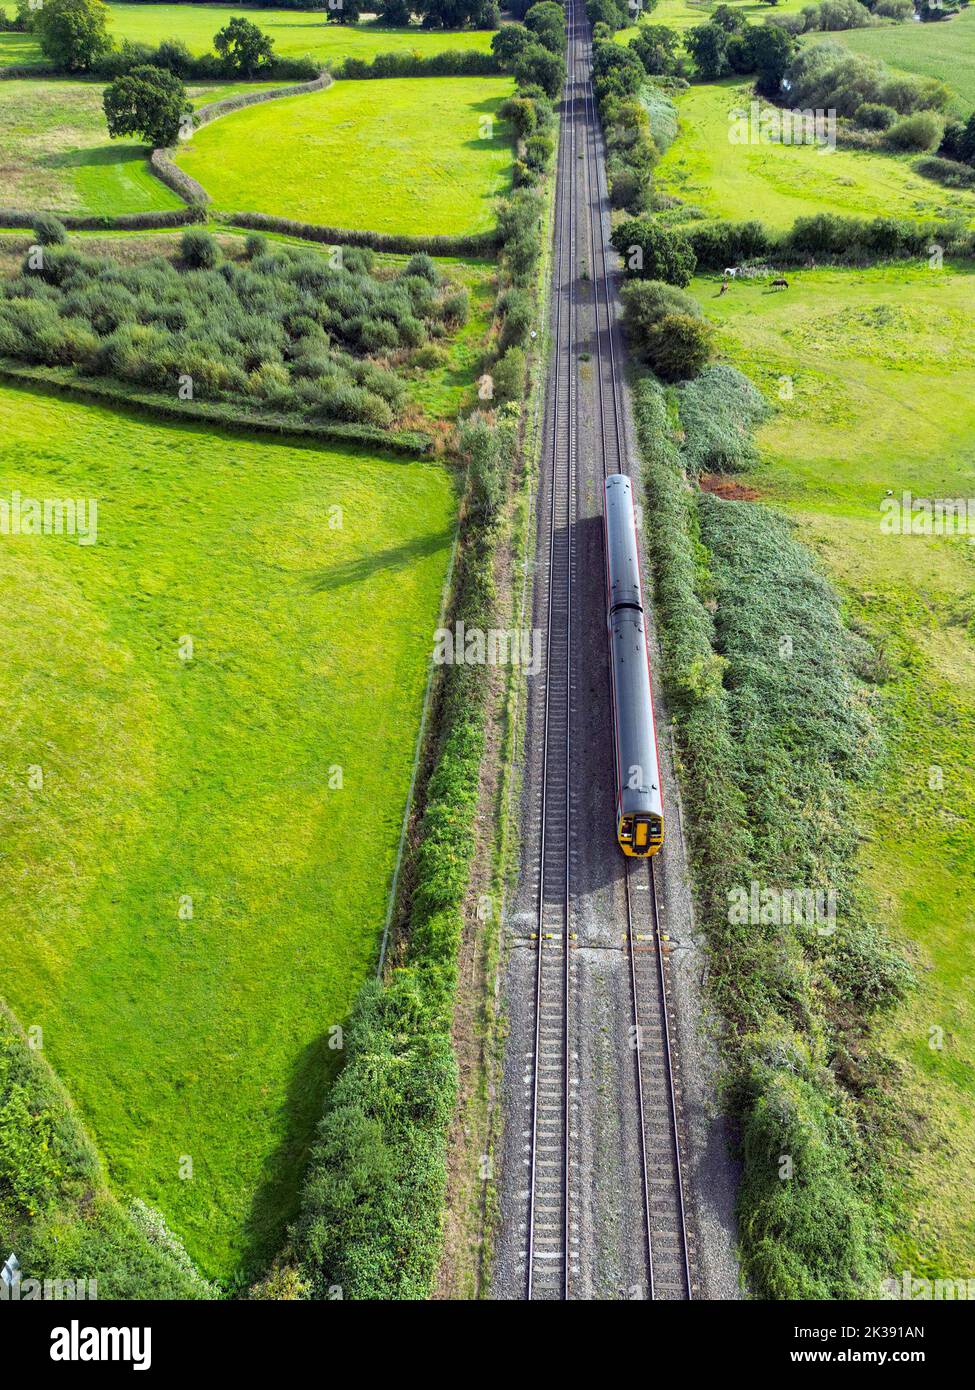 Bonvilston, Vale of Glamorgan, Wales - September 2022: Aerial view of a commuter train on a main railway line through countryside near Cardiff Stock Photo